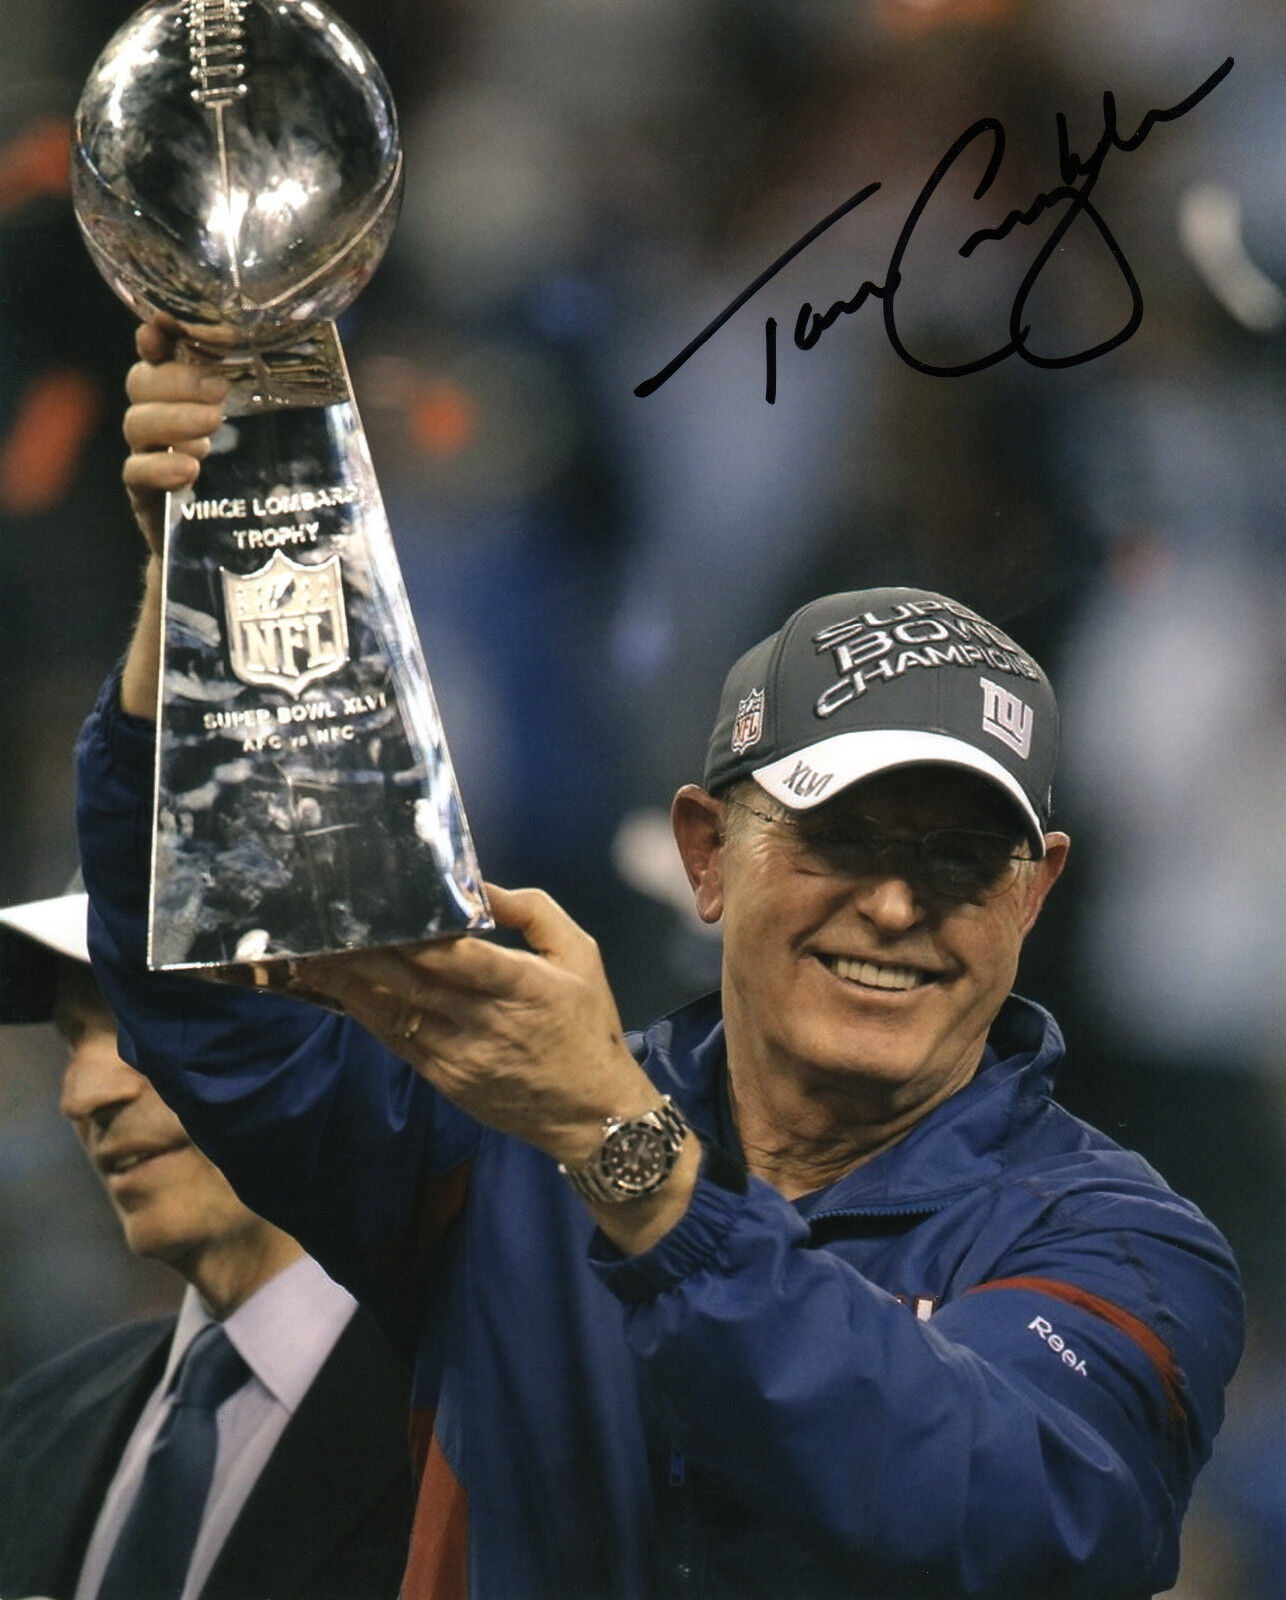 Tom Coughlin Reprinted auto football 8x10 Photo Poster painting Giants Super Bowl Champs